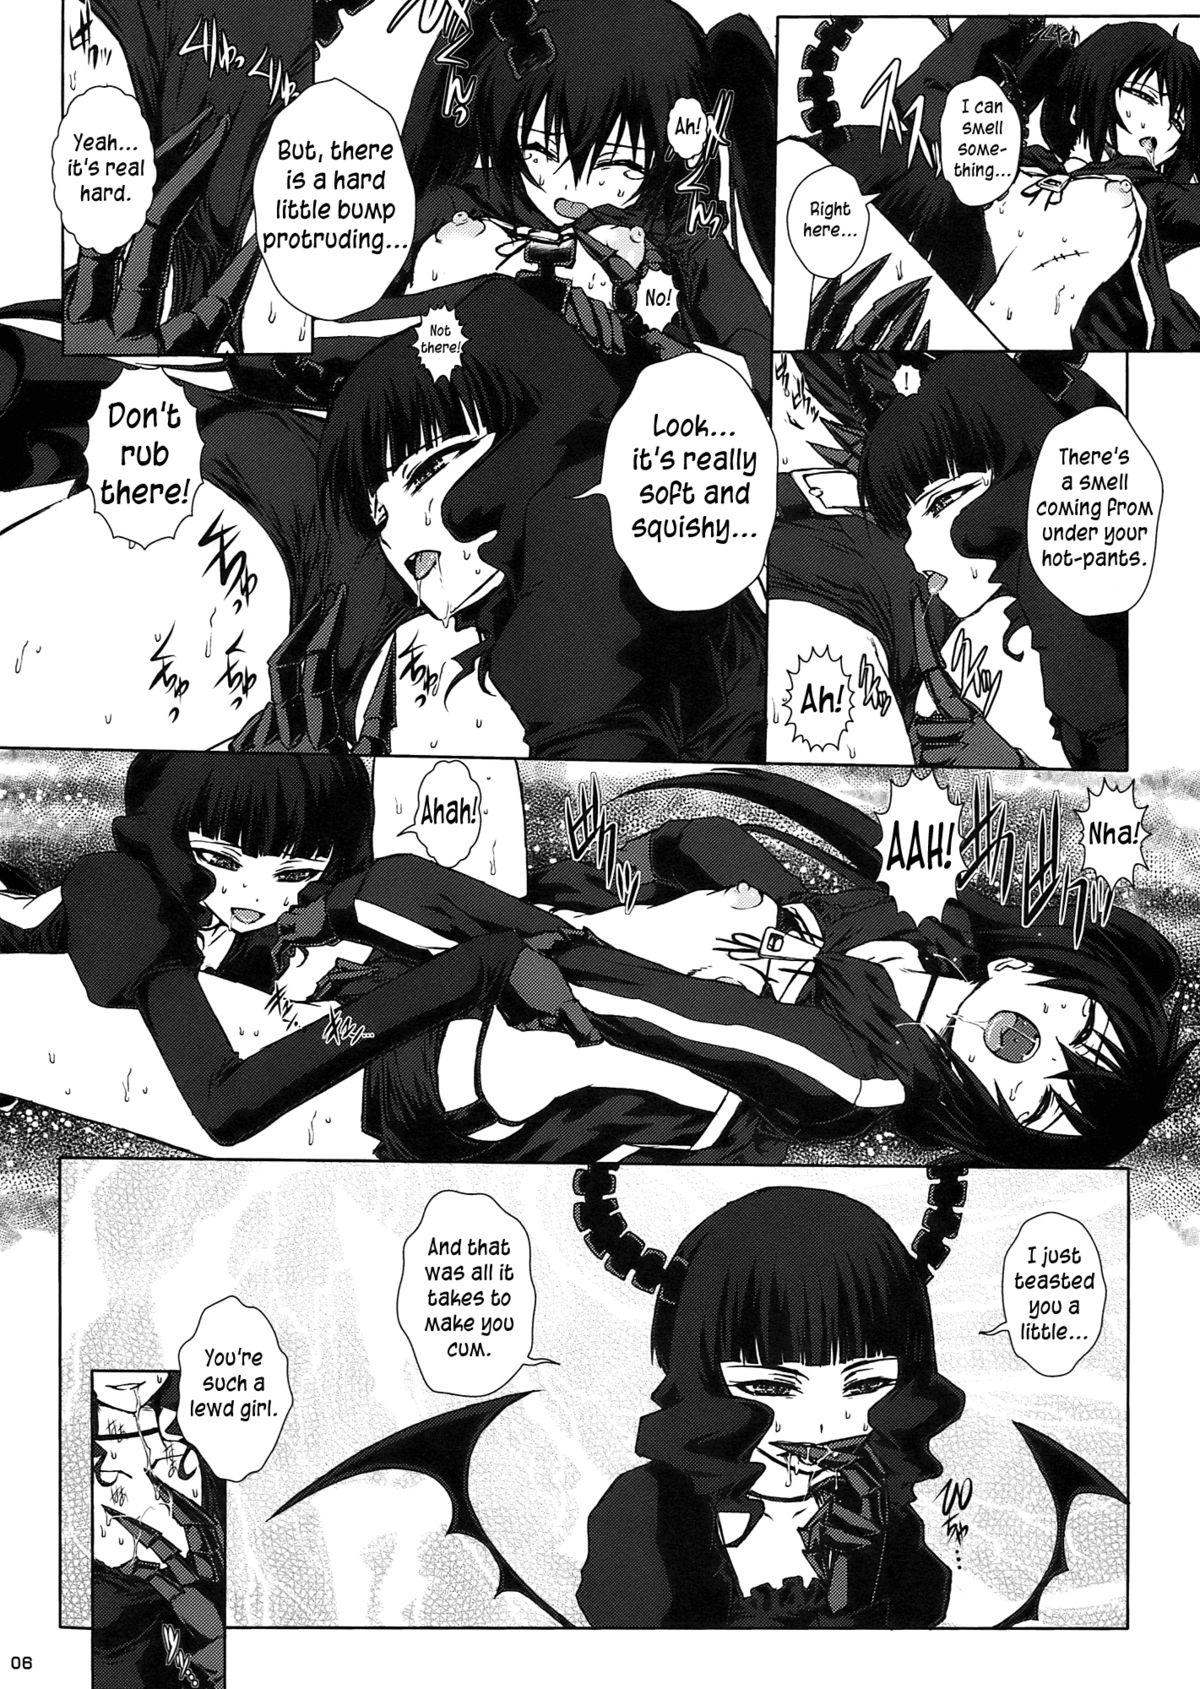 Farting B★RS SAND! - Black rock shooter Dildos - Page 8